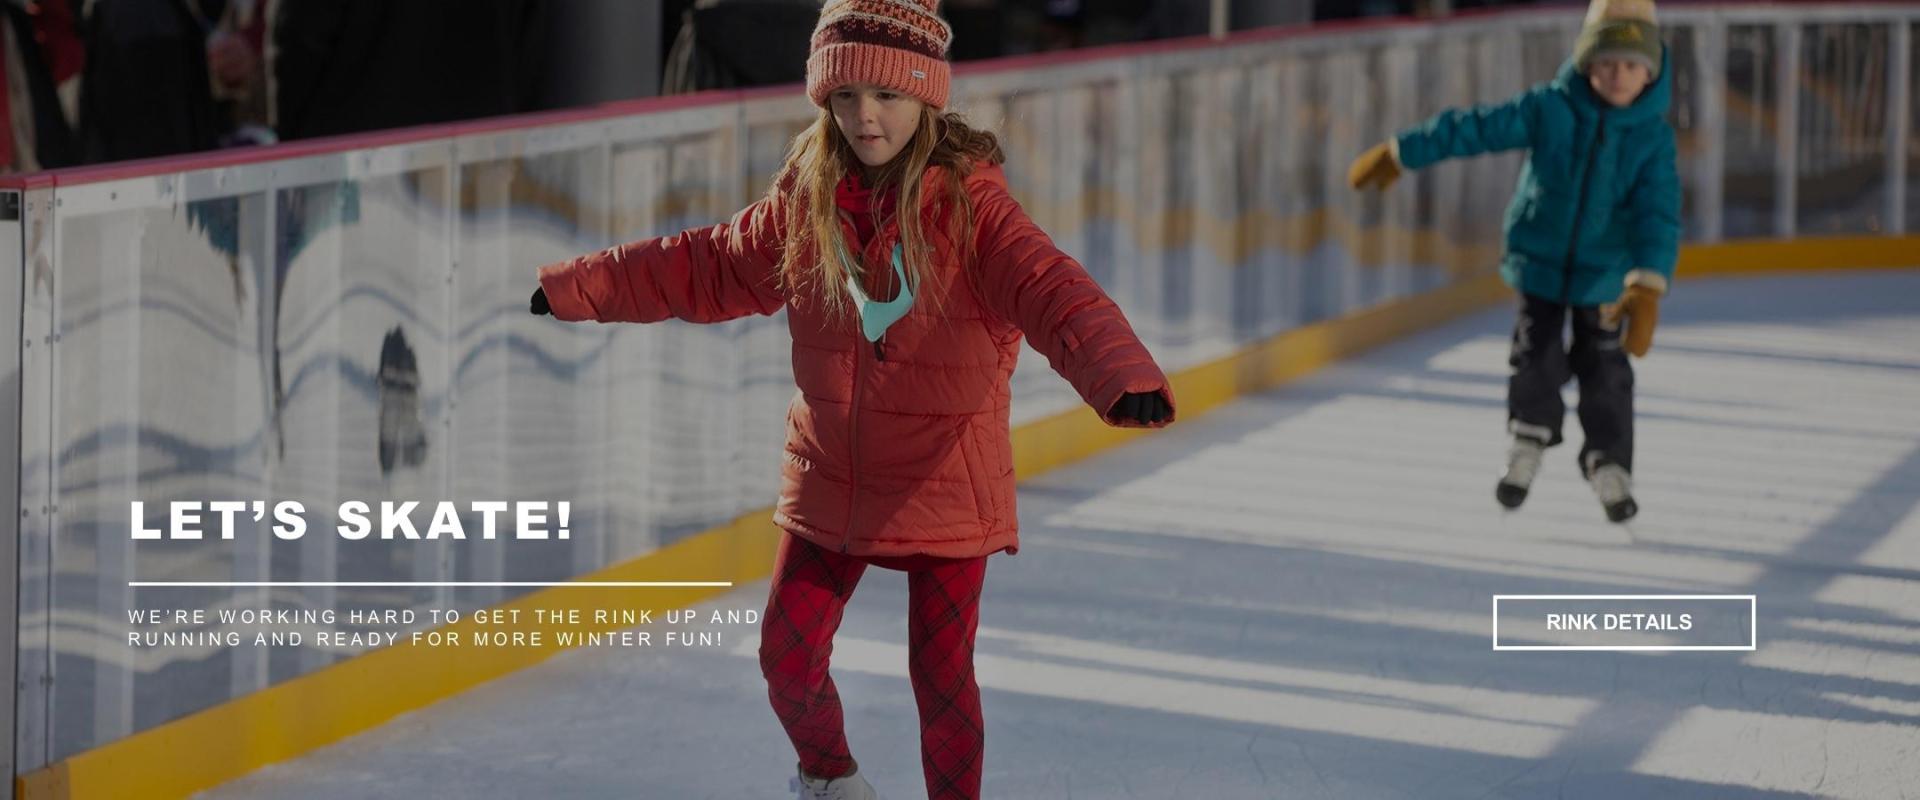 This image shows two kids skating with text that says let's skate and a button to view skating rink opening updates